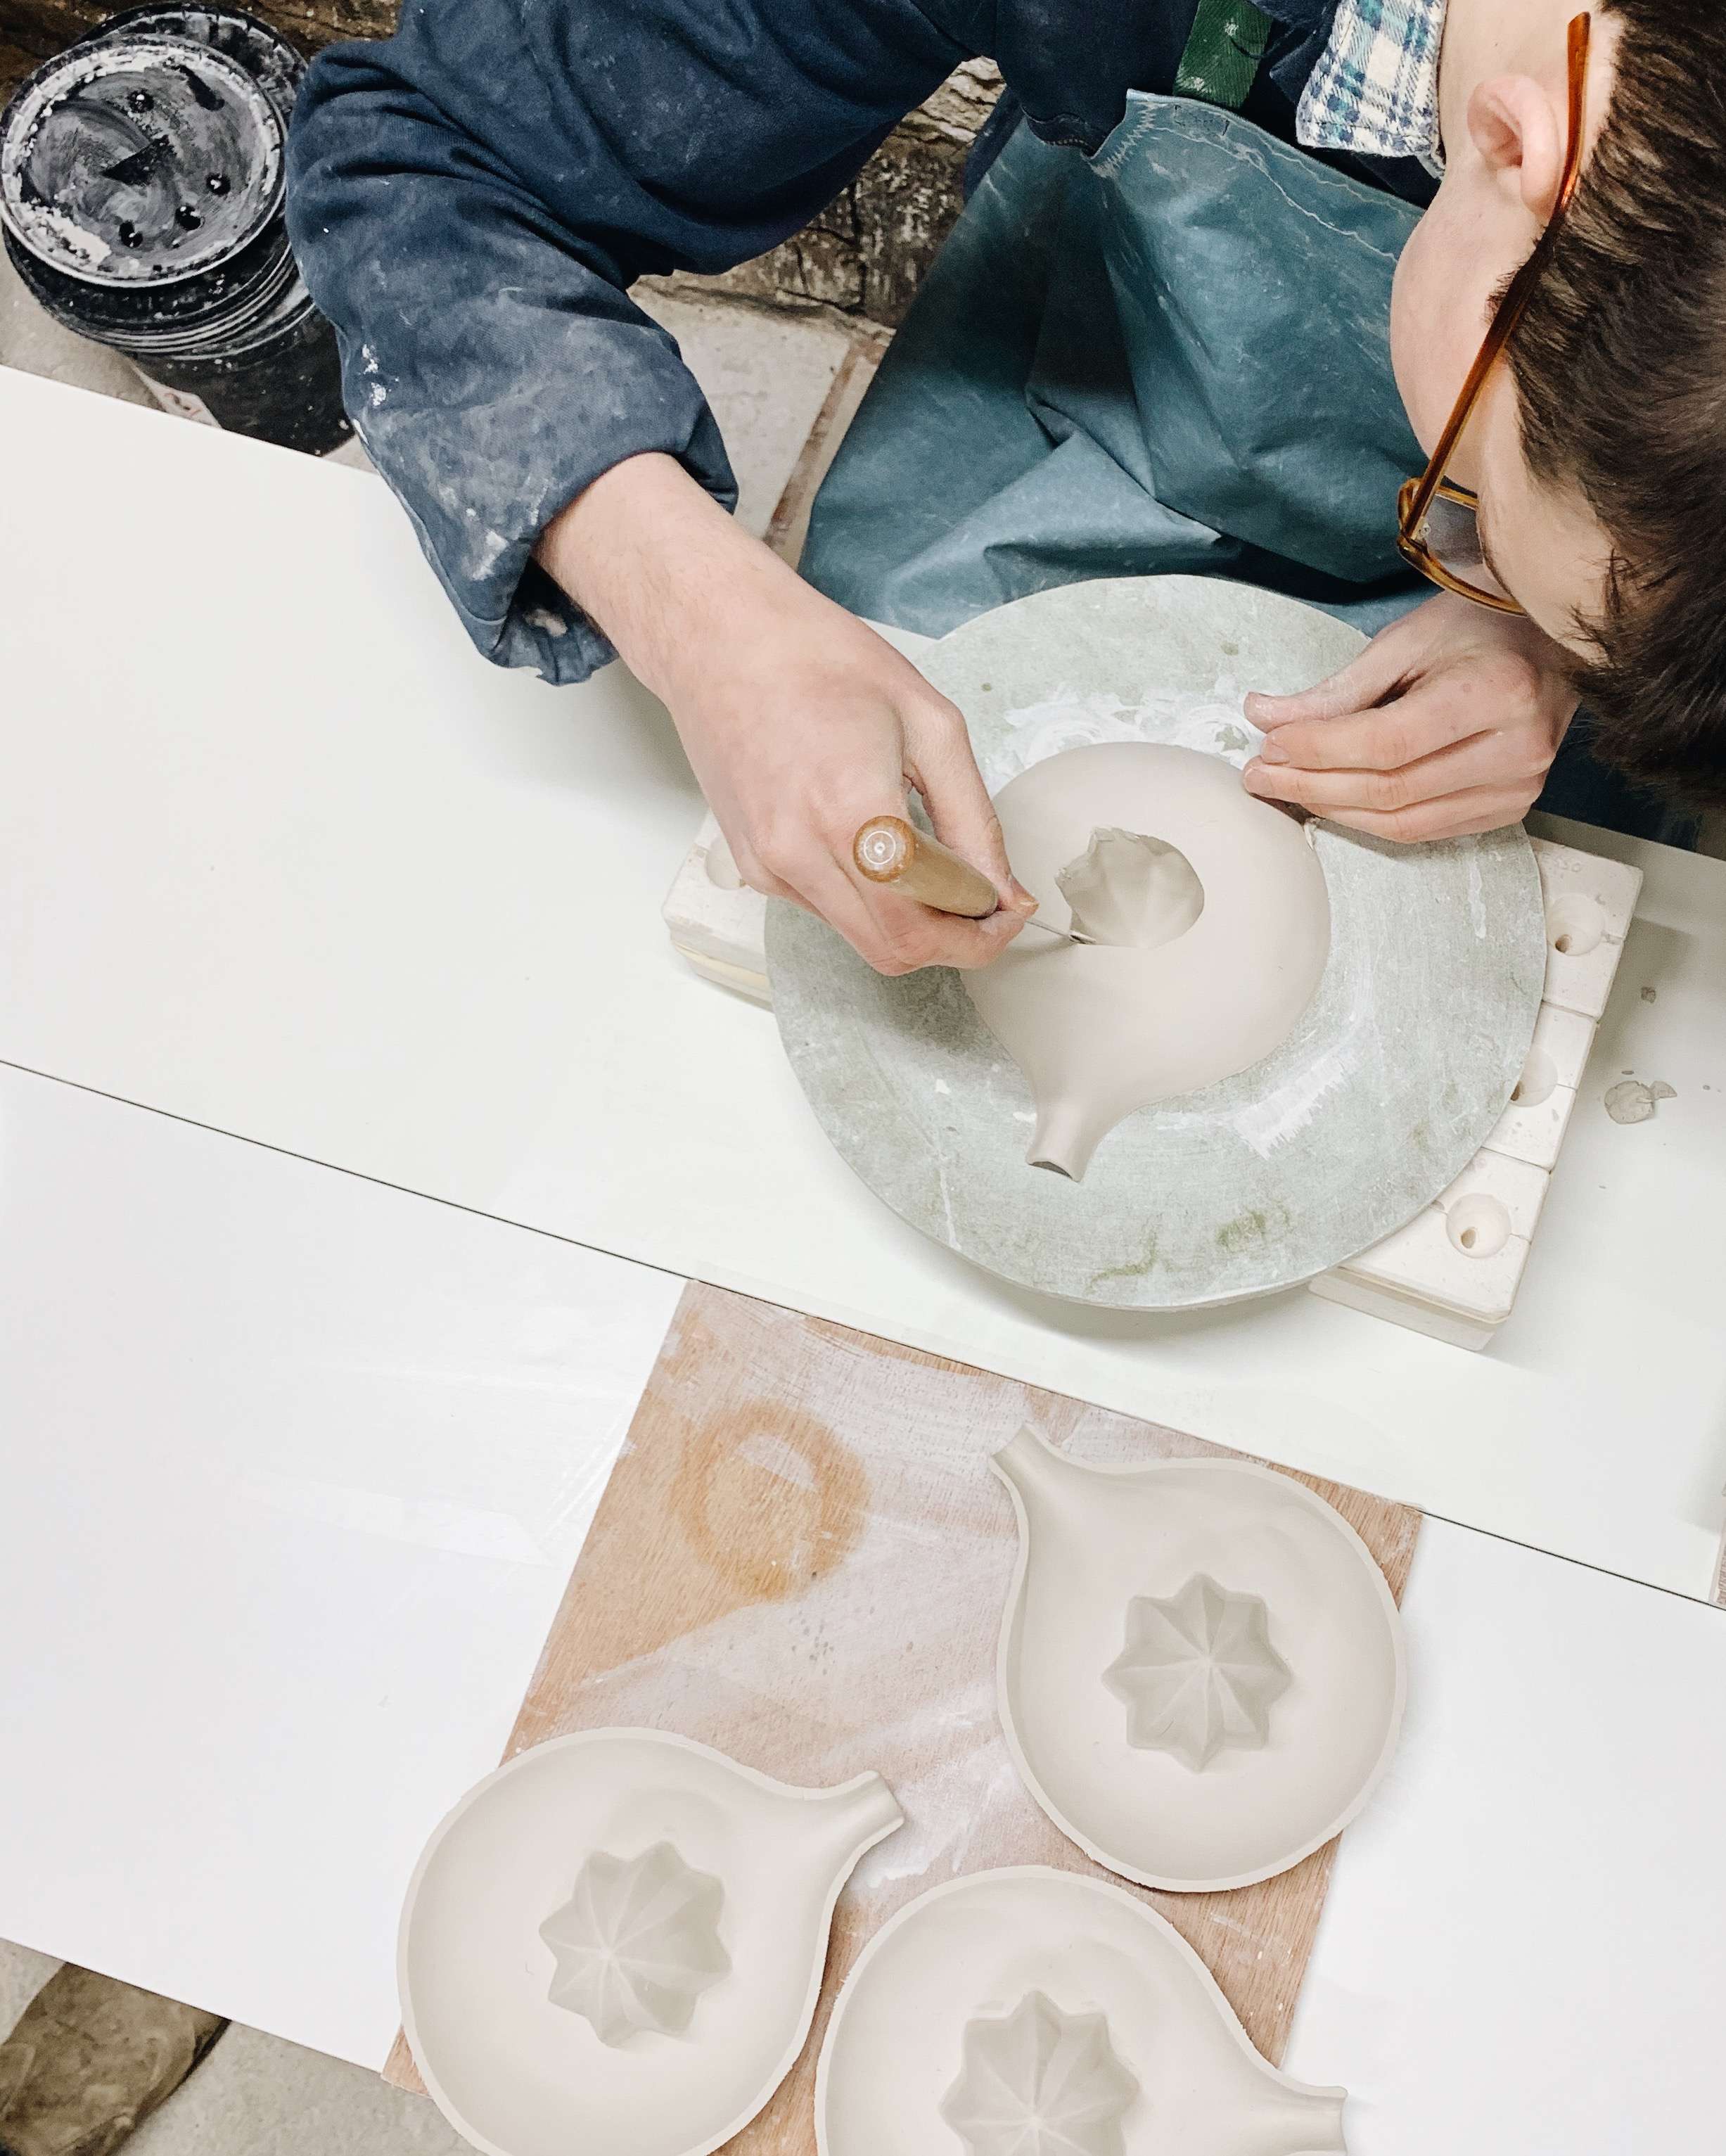 Why the slow, mindful craft of pottery is booming worldwide